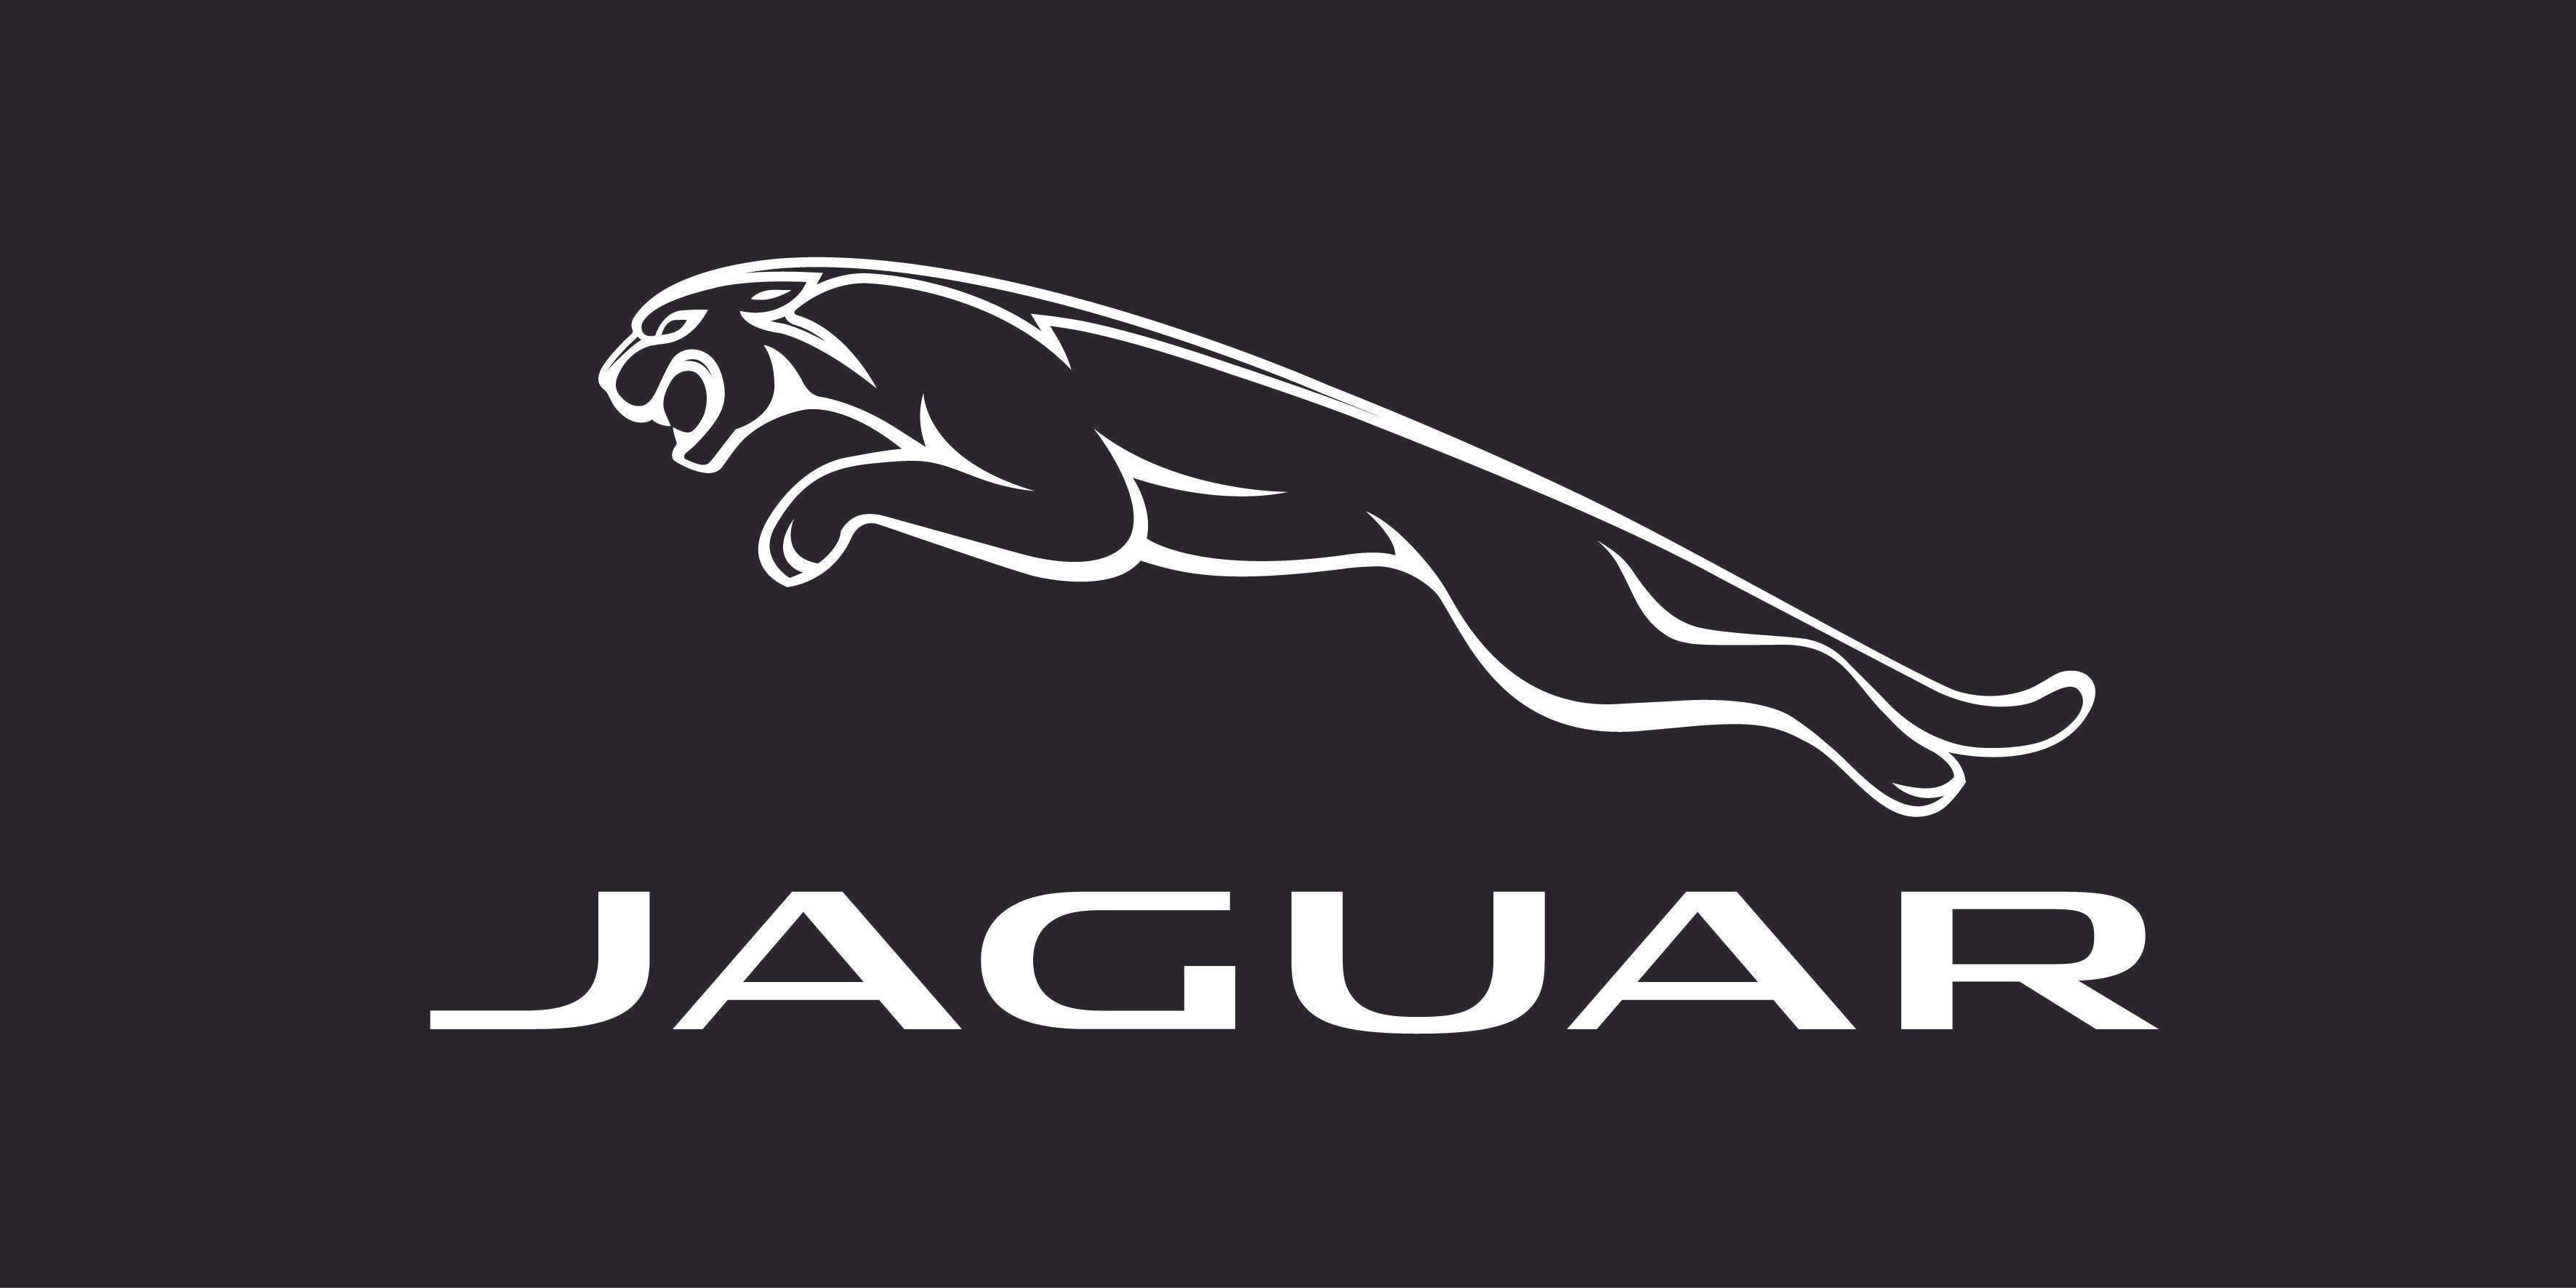 A Guide to the Best Jaguar Cars Available in India